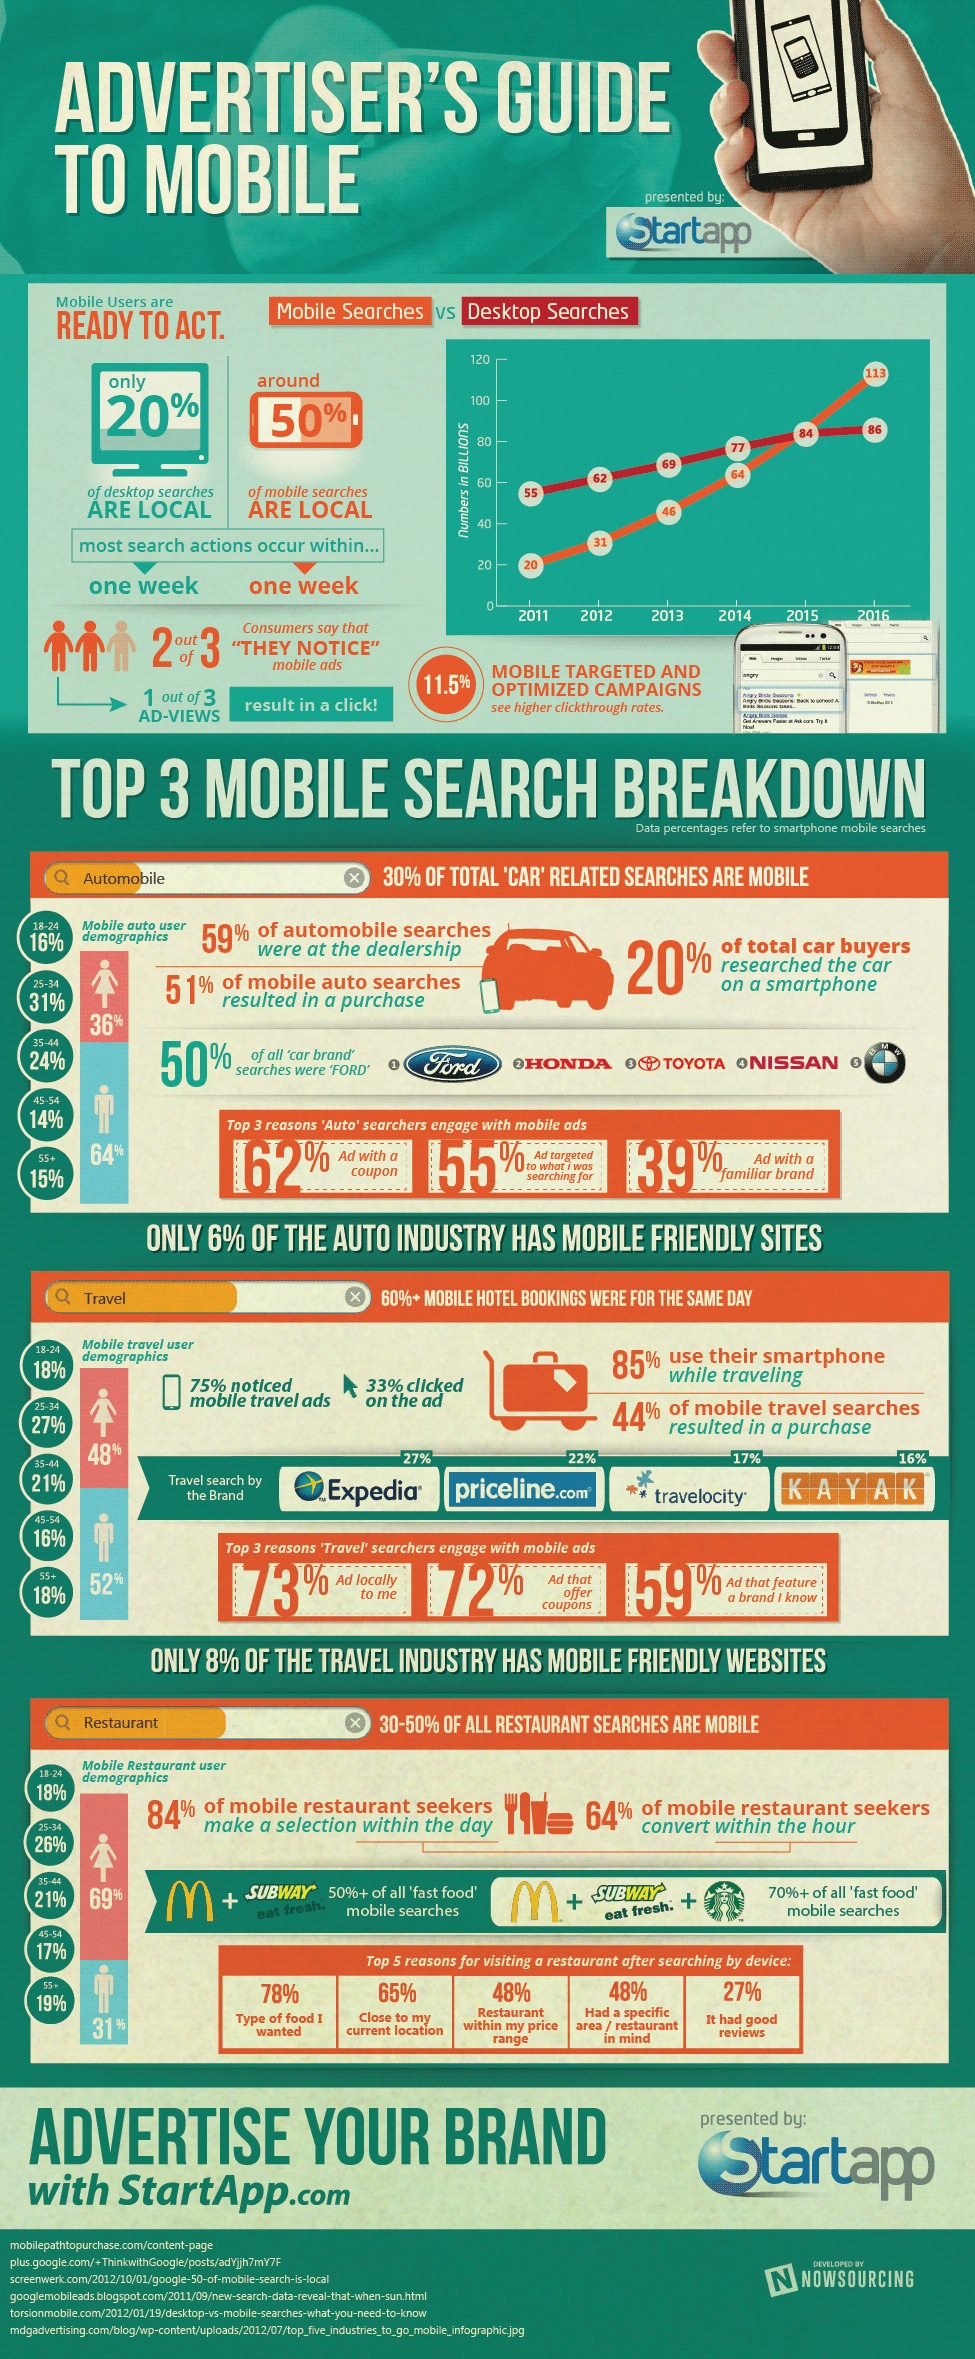 mobile-advertising-guide-infographic